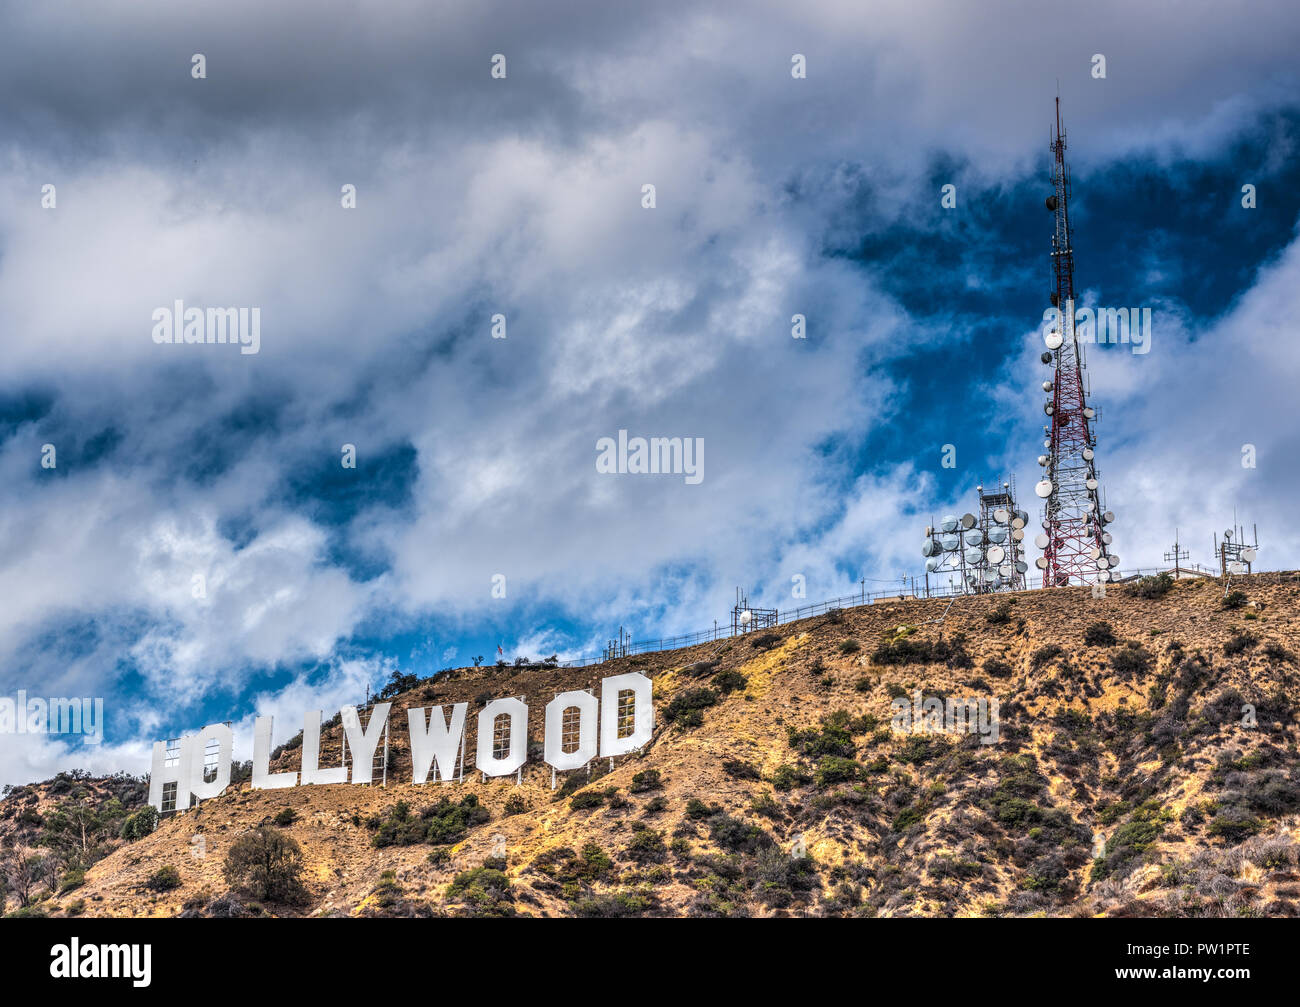 Los Angeles, CA, USA - October 28, 2016: Hollywood sign under a cloudy sky Stock Photo